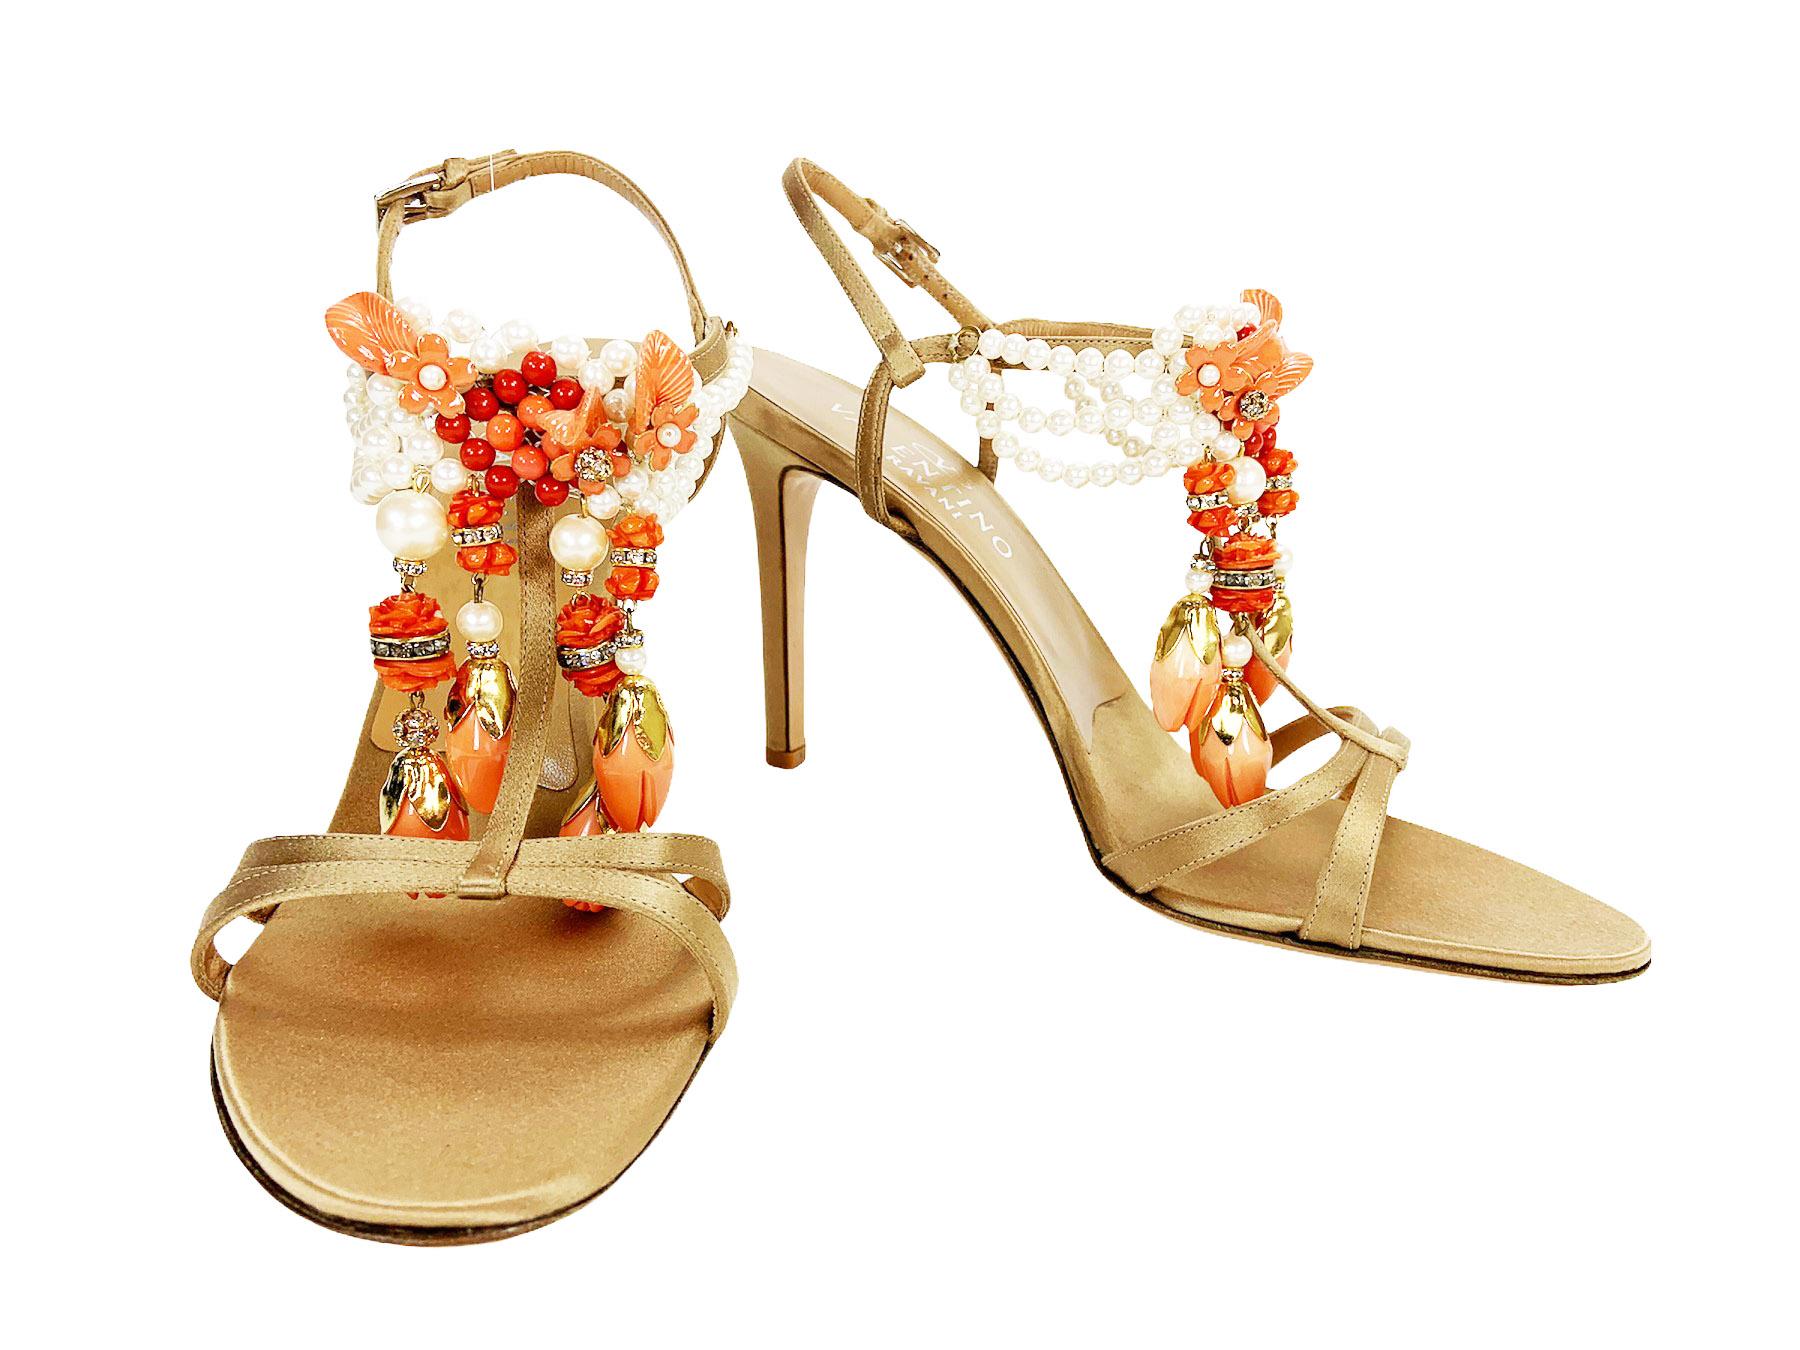 New Valentino Garavani FW 2004 Pearls Crystal Enamel Embellished Sandals 40 - 10 In New Condition For Sale In Montgomery, TX